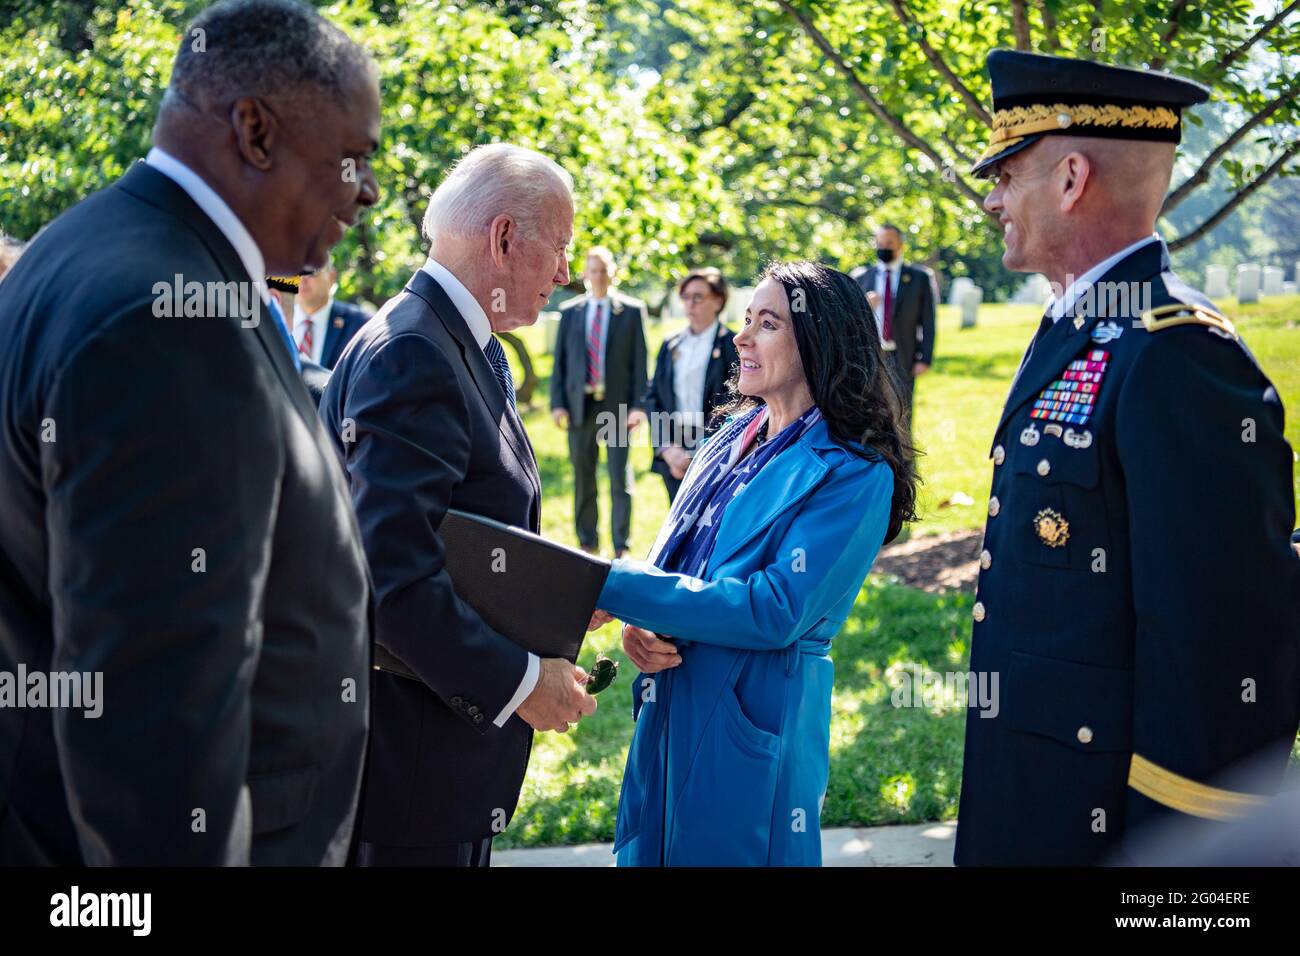 Arlington, United States Of America. 31st May, 2021. U.S President Joe Biden, is welcomed by Karen Durham-Aguilera, center, executive director, Army National Military Cemeteries on his arrival for the National Memorial Day Observance at Arlington National Cemetery May 31, 2021 Arlington, Virginia. U.S. Army Maj. Gen. Omar Jones IV, right, commanding general, Joint Task Force-National Capitol Region and Secretary of Defense Lloyd Austin III left, look on. Credit: Planetpix/Alamy Live News Stock Photo